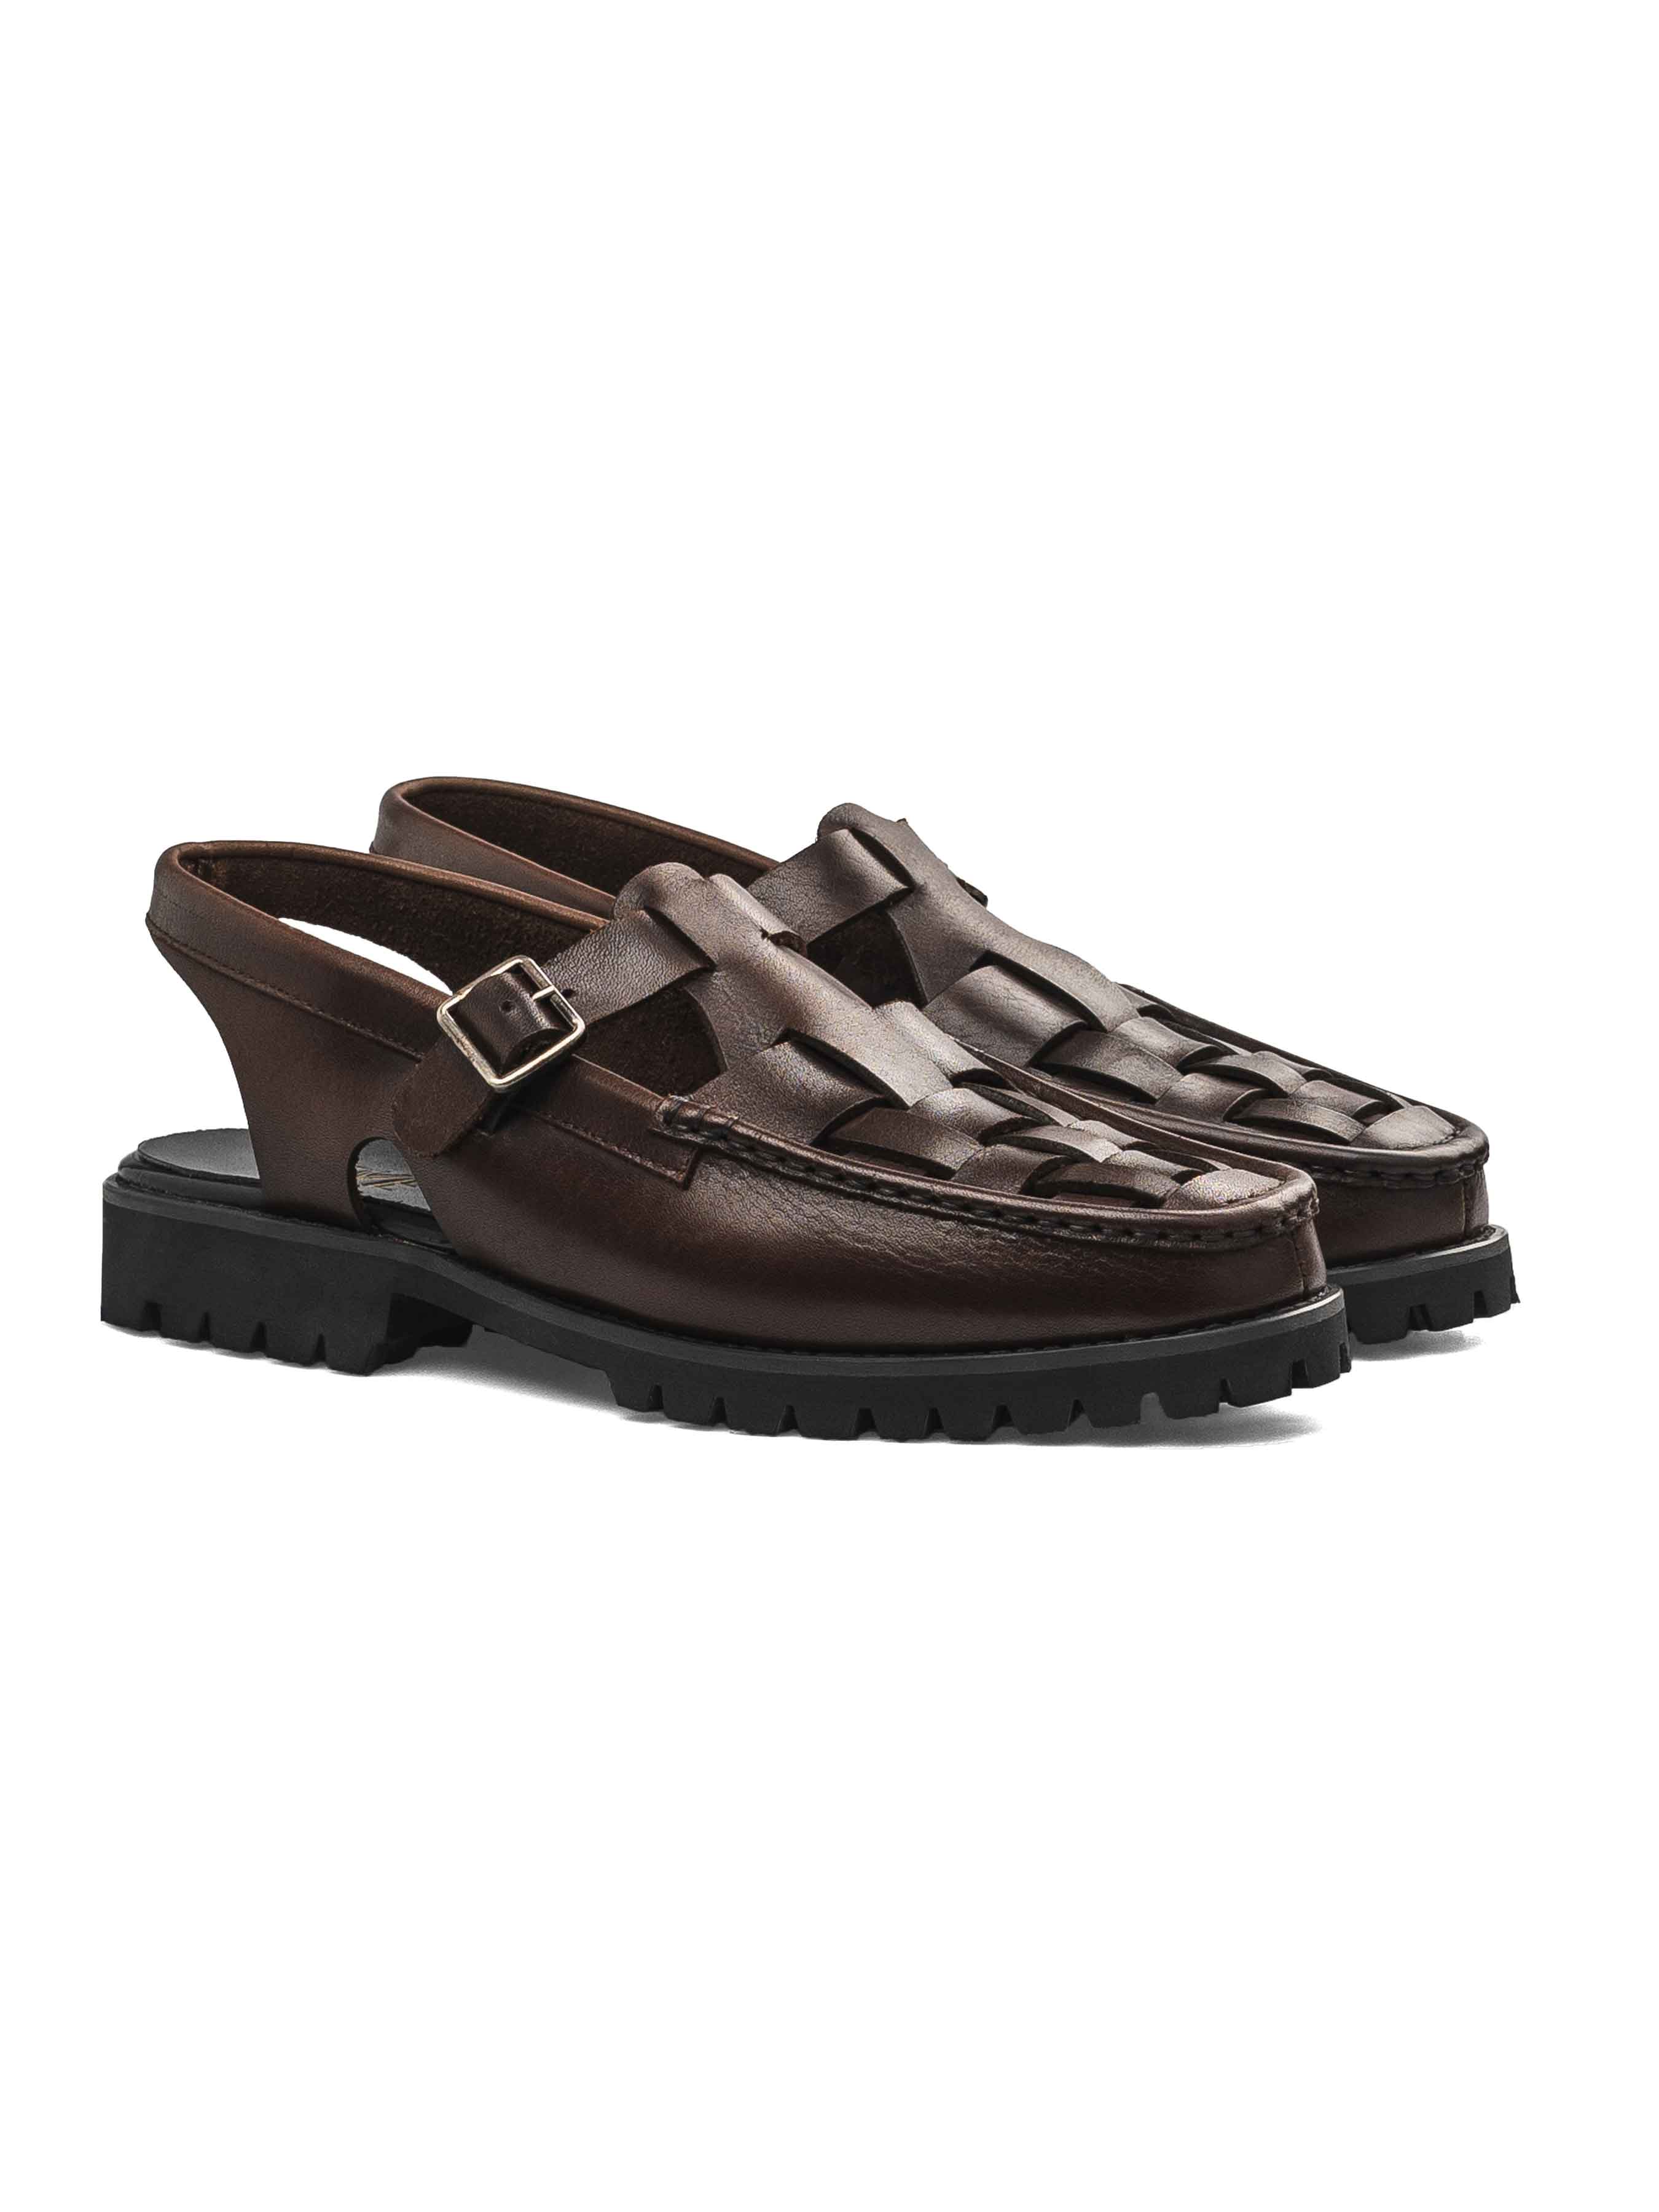 Perry Weave Sandal - Dark Brown Leather (Chunky Sole)